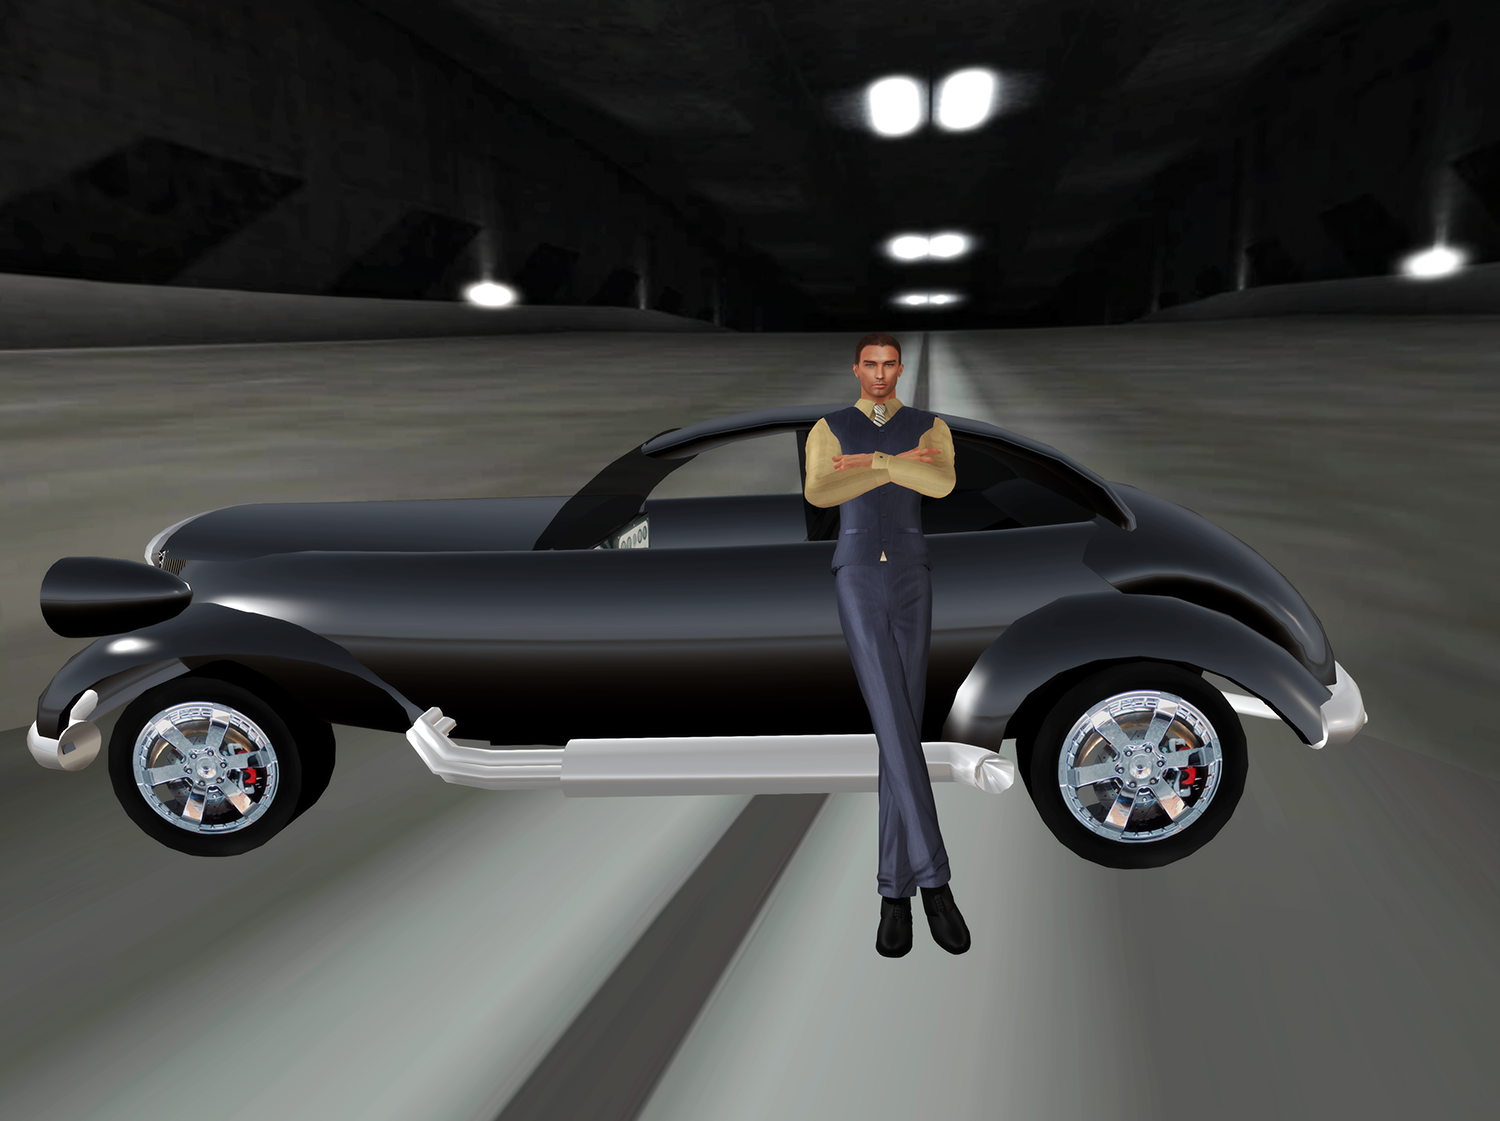 A male Second Life avatar poses on a car